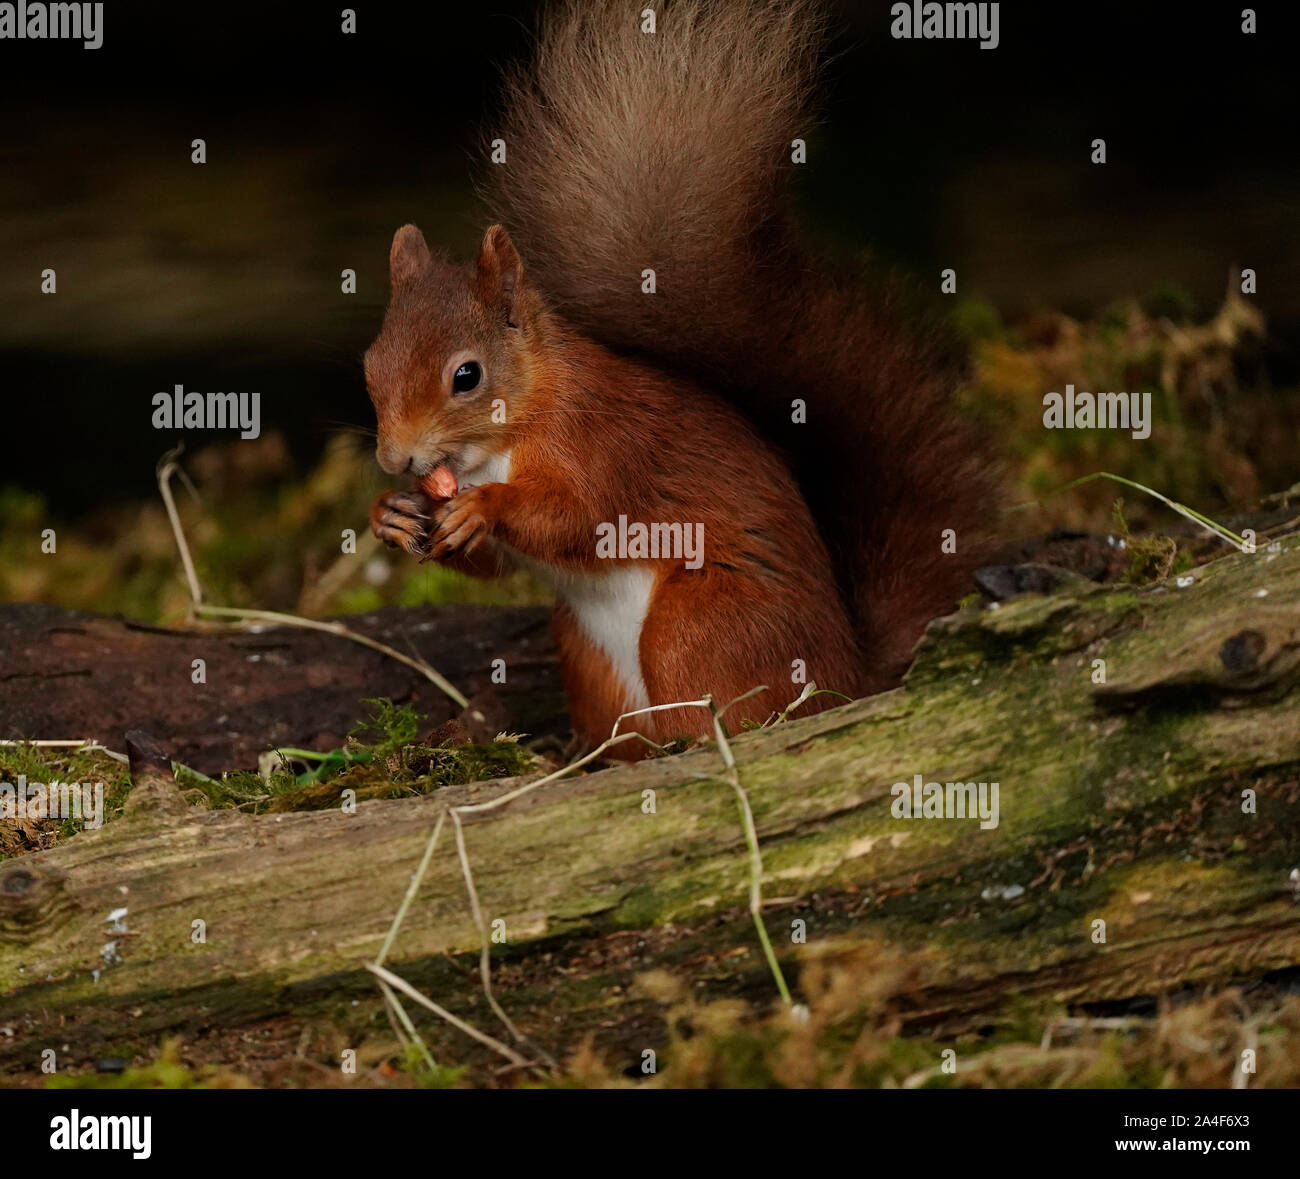 Cute Red Squirrel with a bushy tail Stock Photo